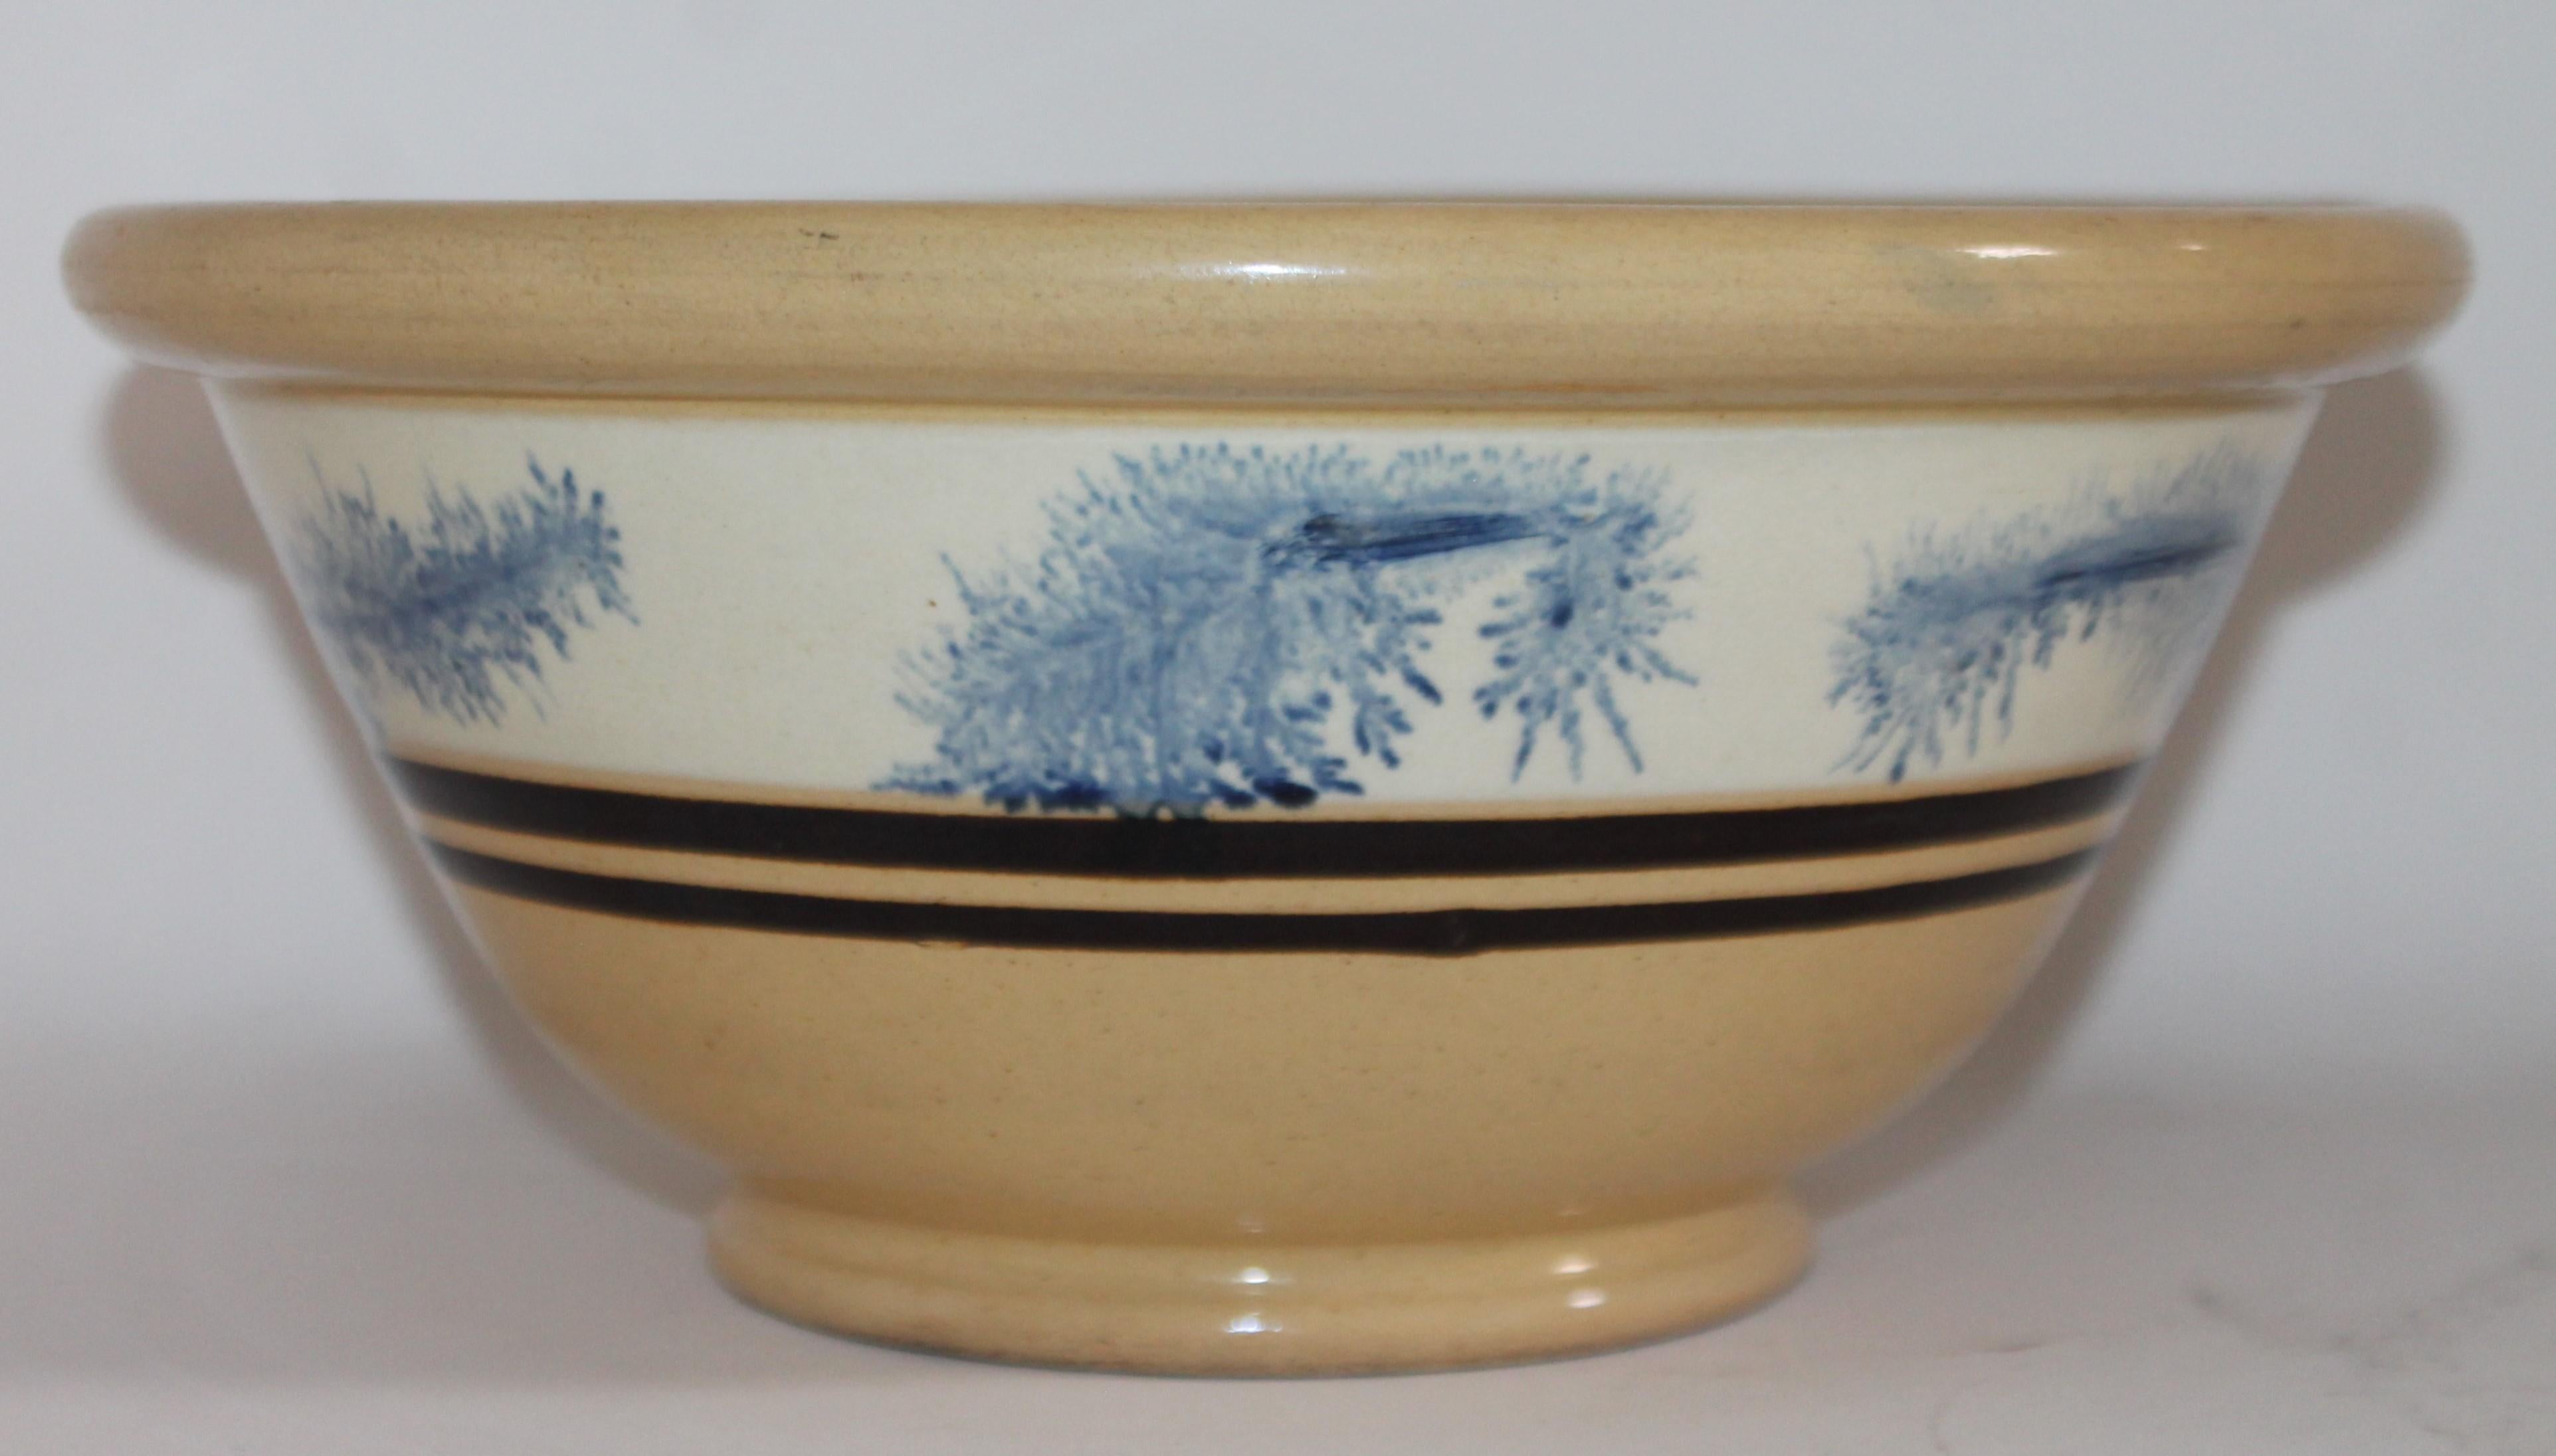 Yellow Ware Bowls - 13 For Sale on 1stDibs | antique yellow ware 